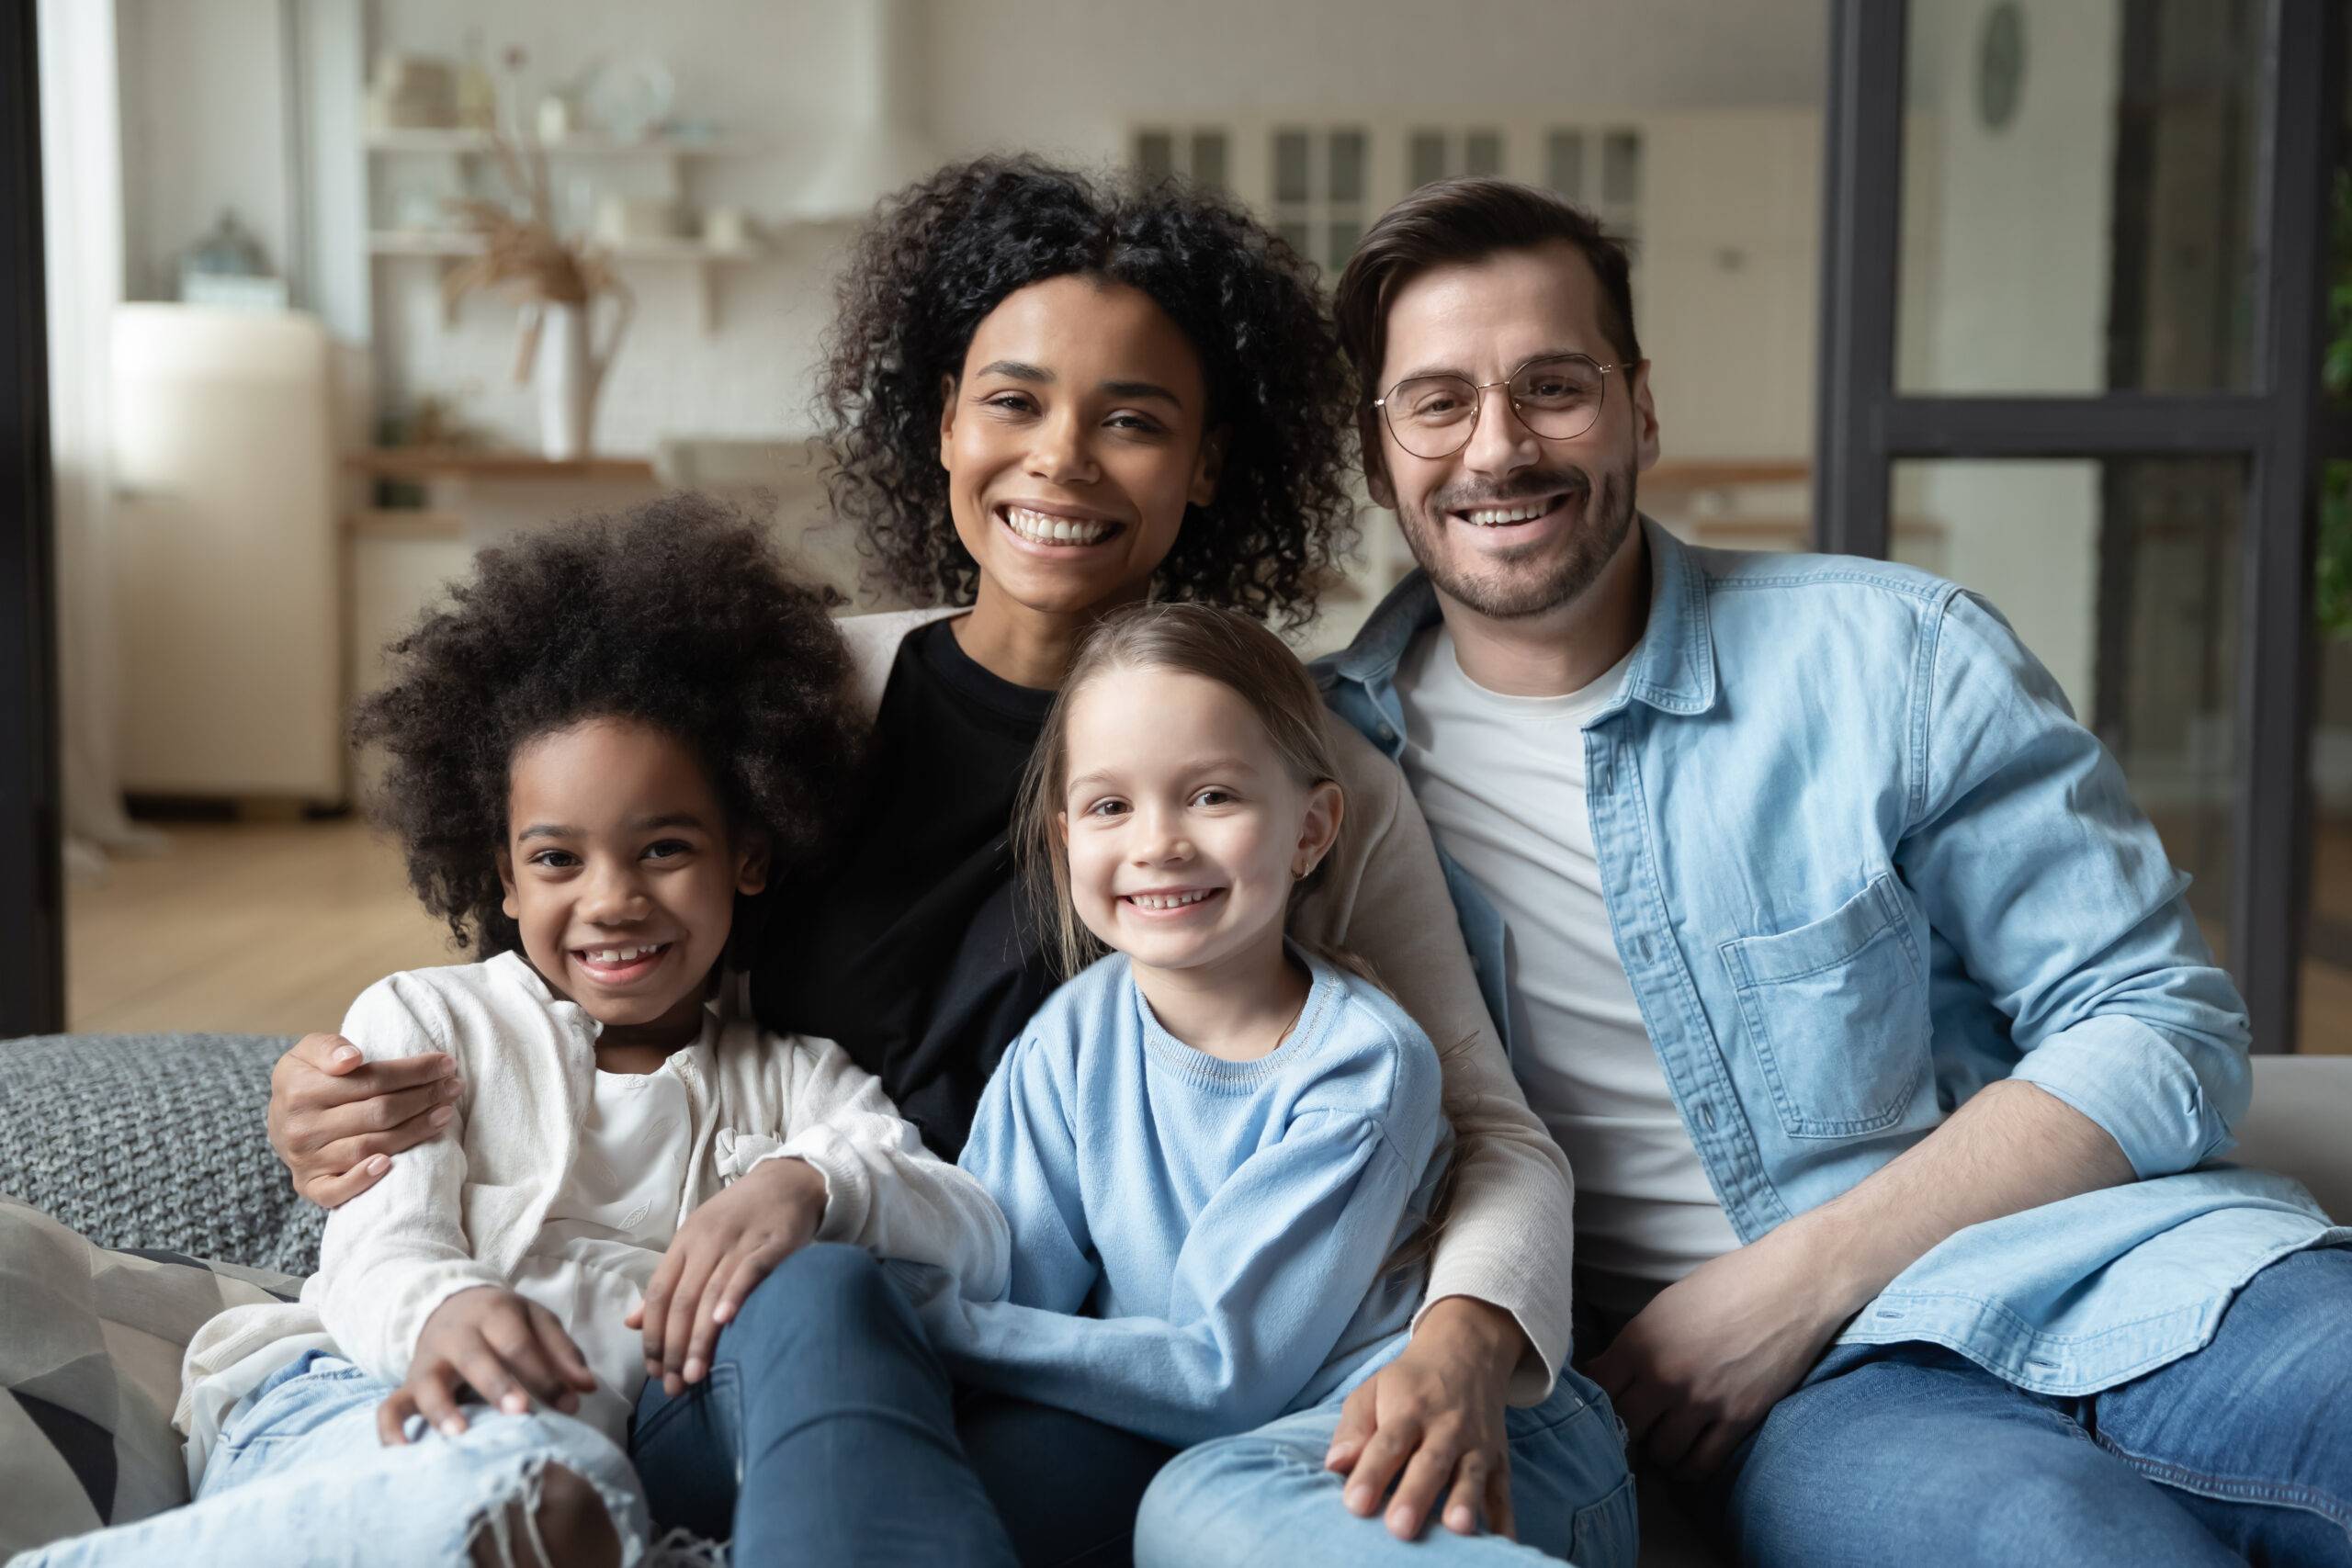 Multiracial family of four smiling together on a couch